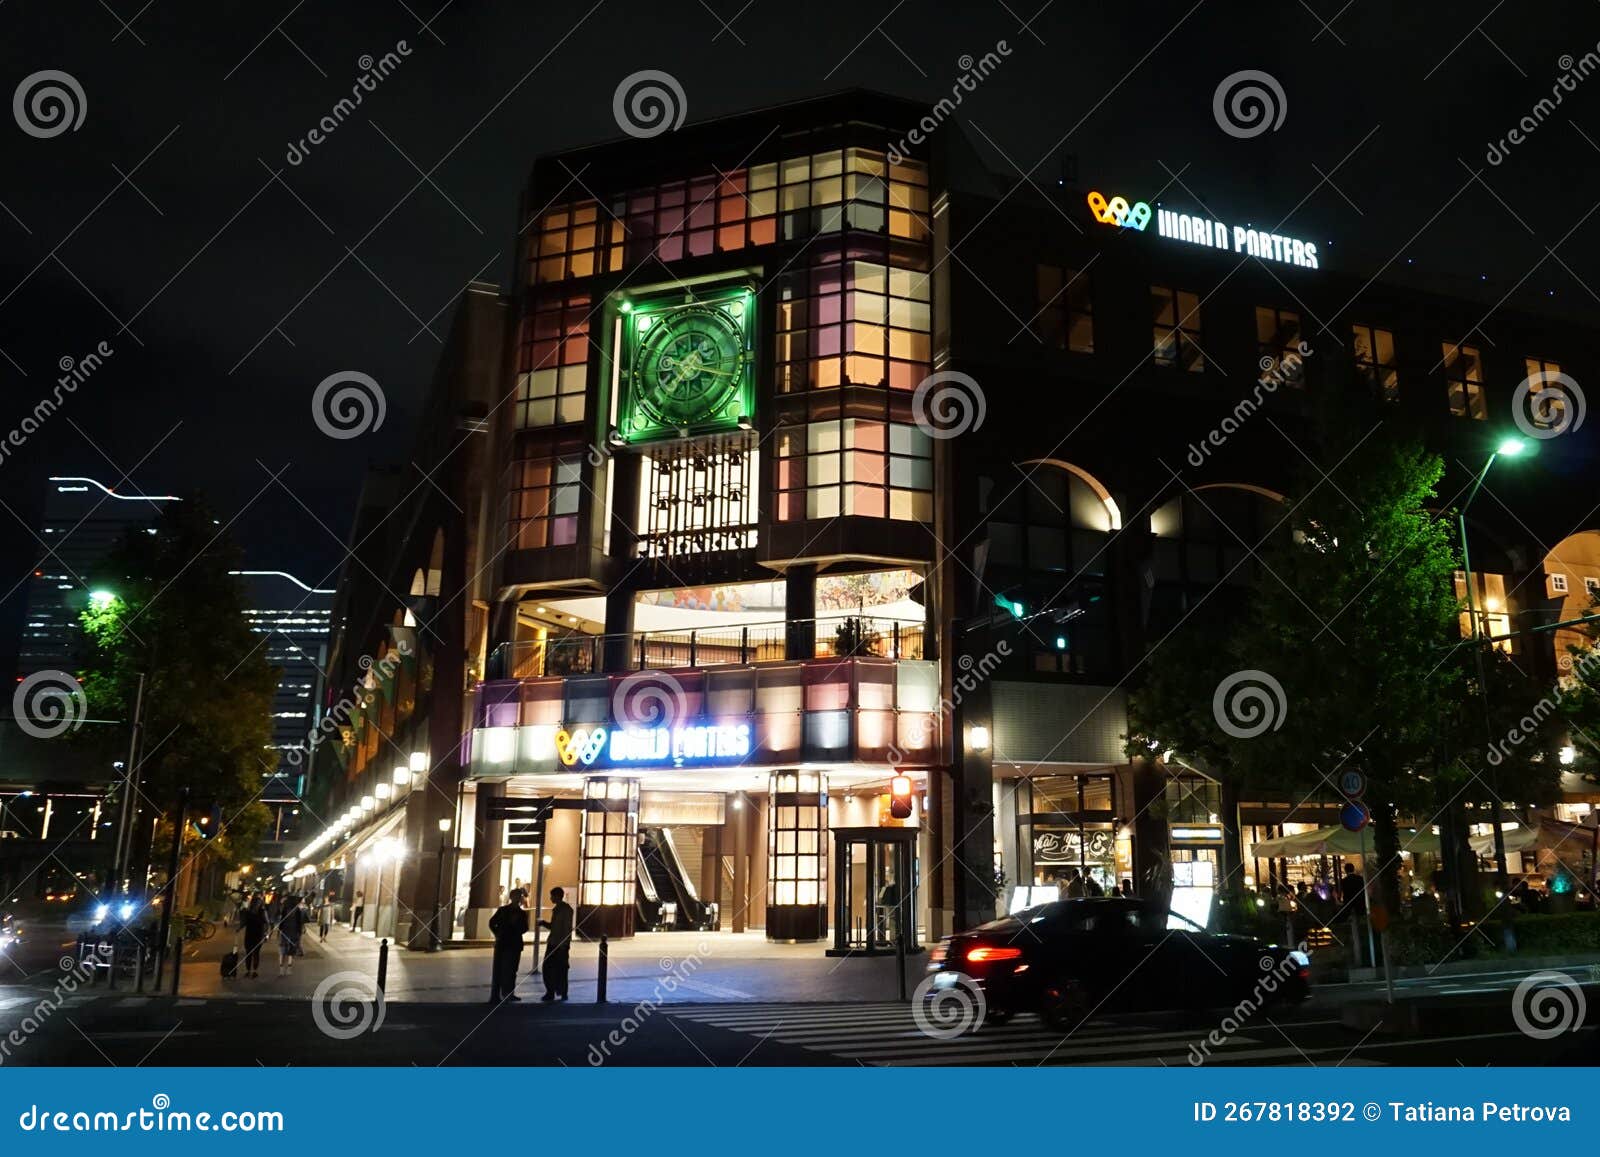 World Porters is a Famous Shopping Mall in Yokohama. Night Time ...